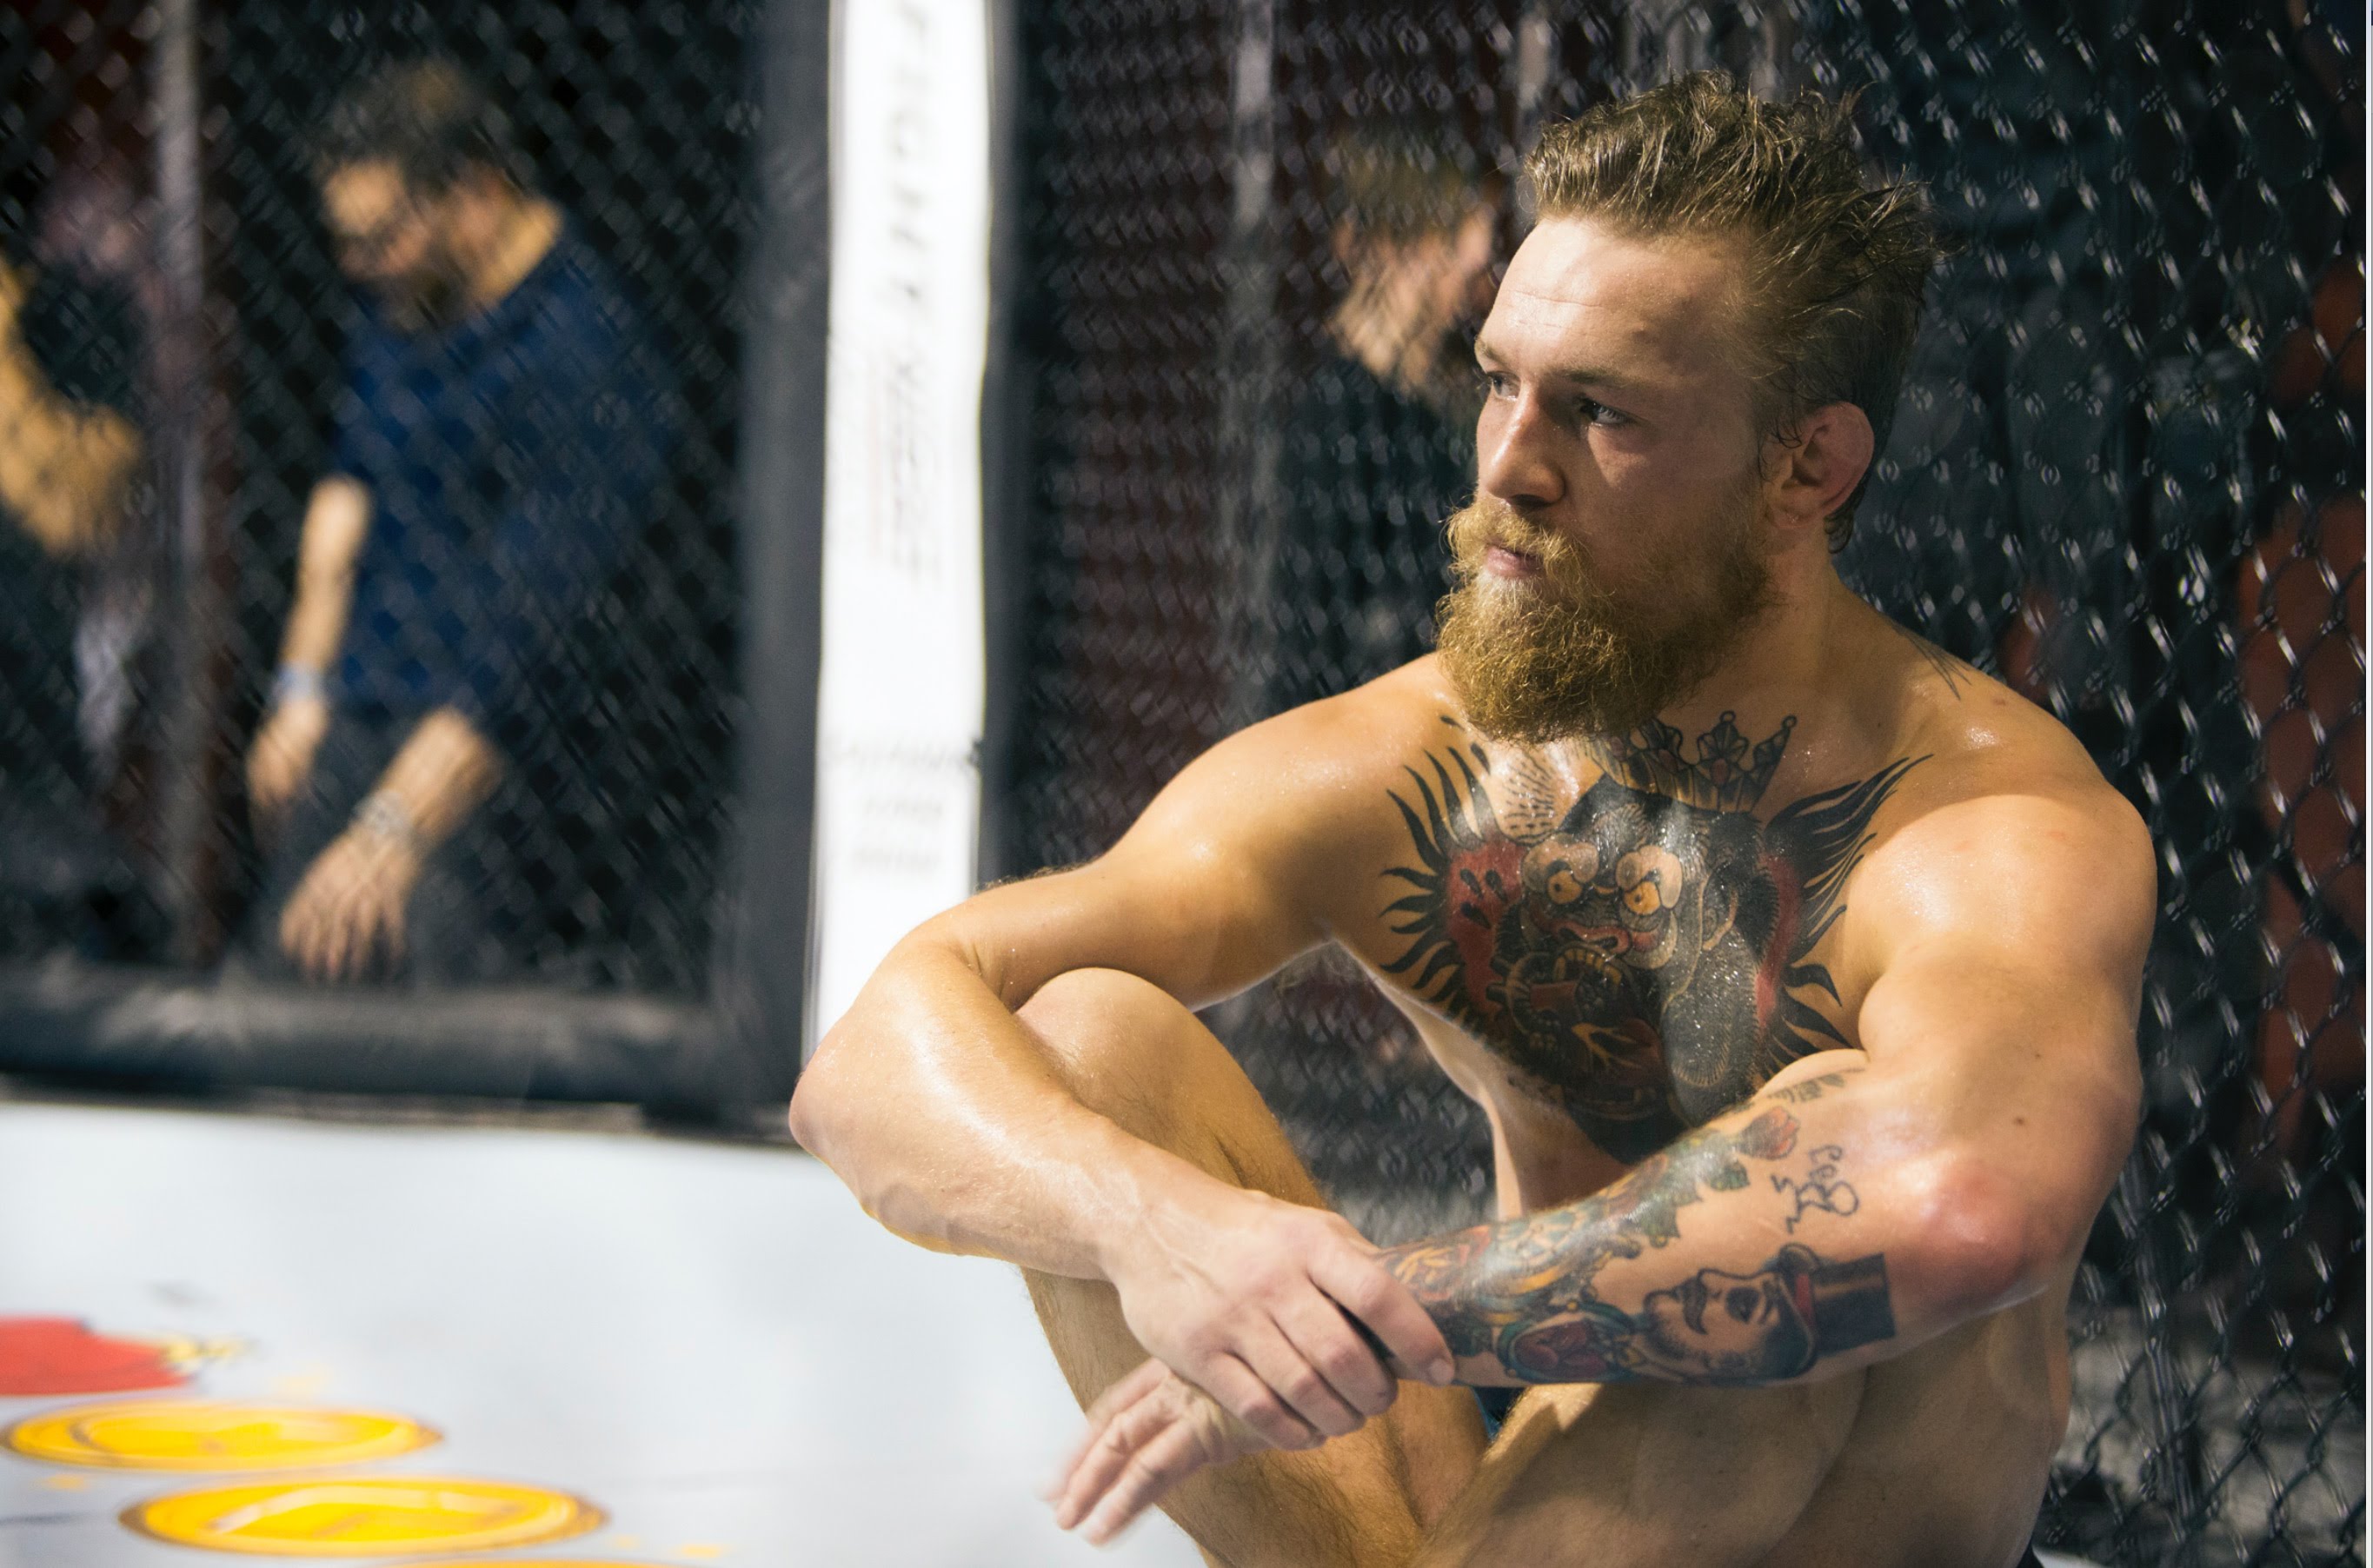 Conor McGregor HD Wallpapers Free Download in High Quality and Resolution